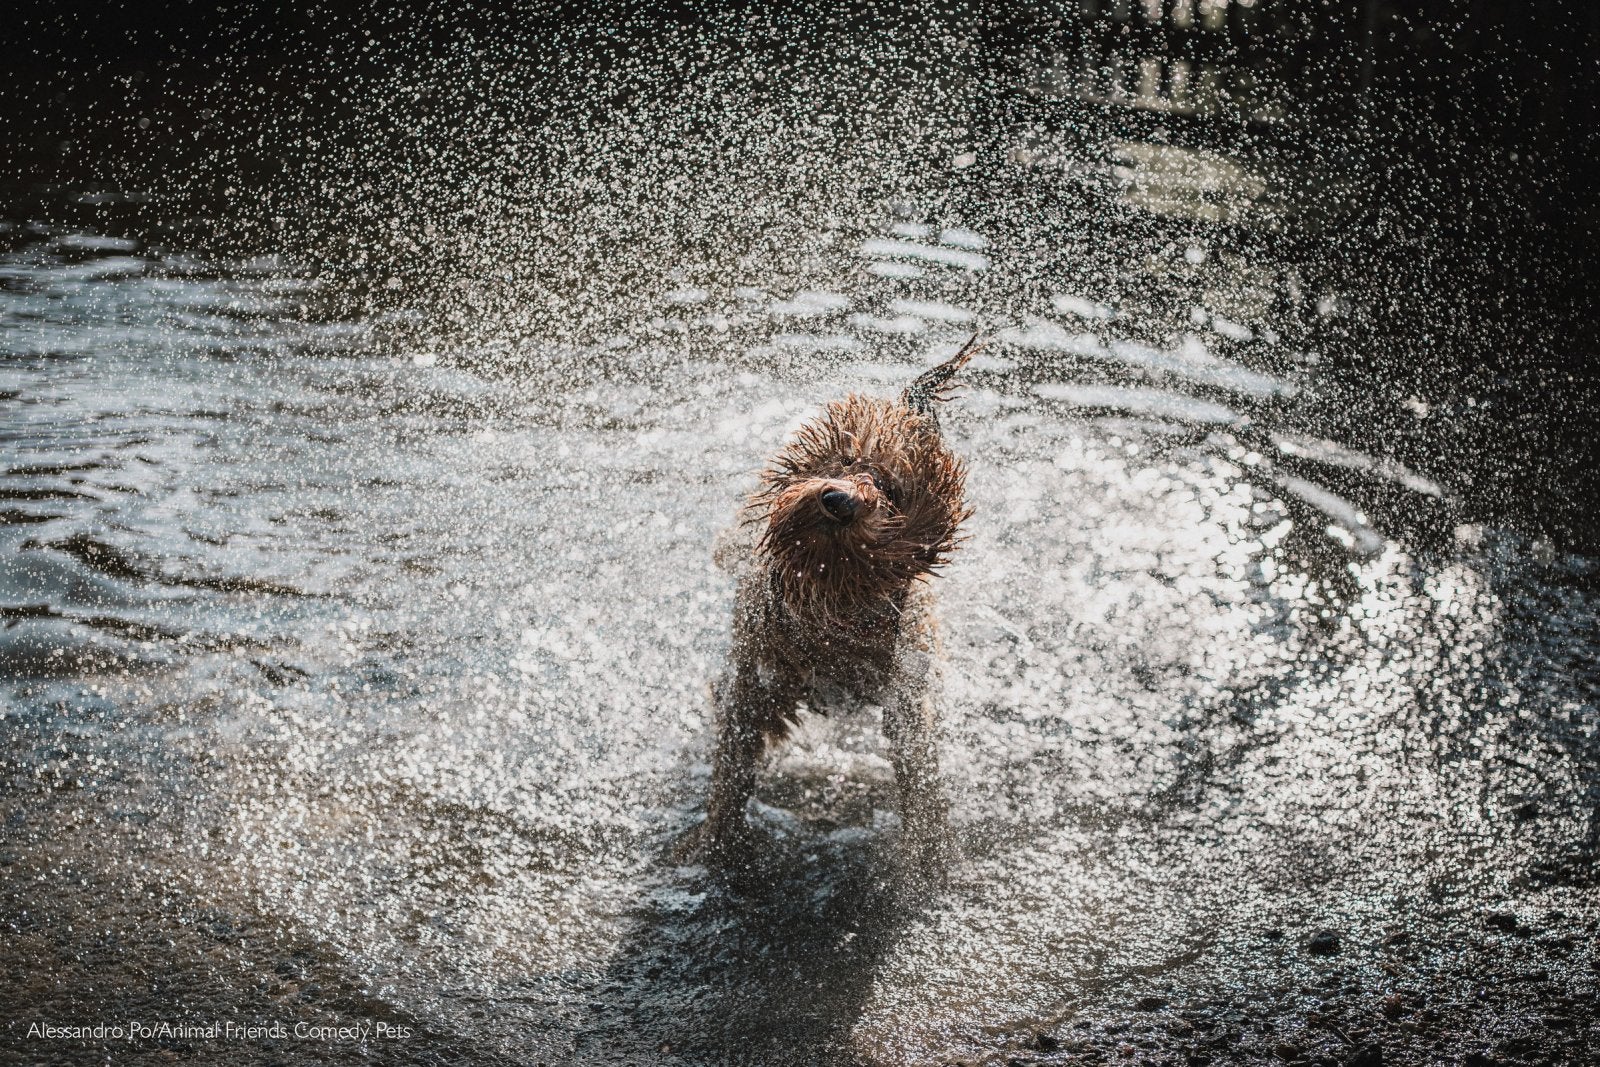 dog shaking off water comedy pet photo awards